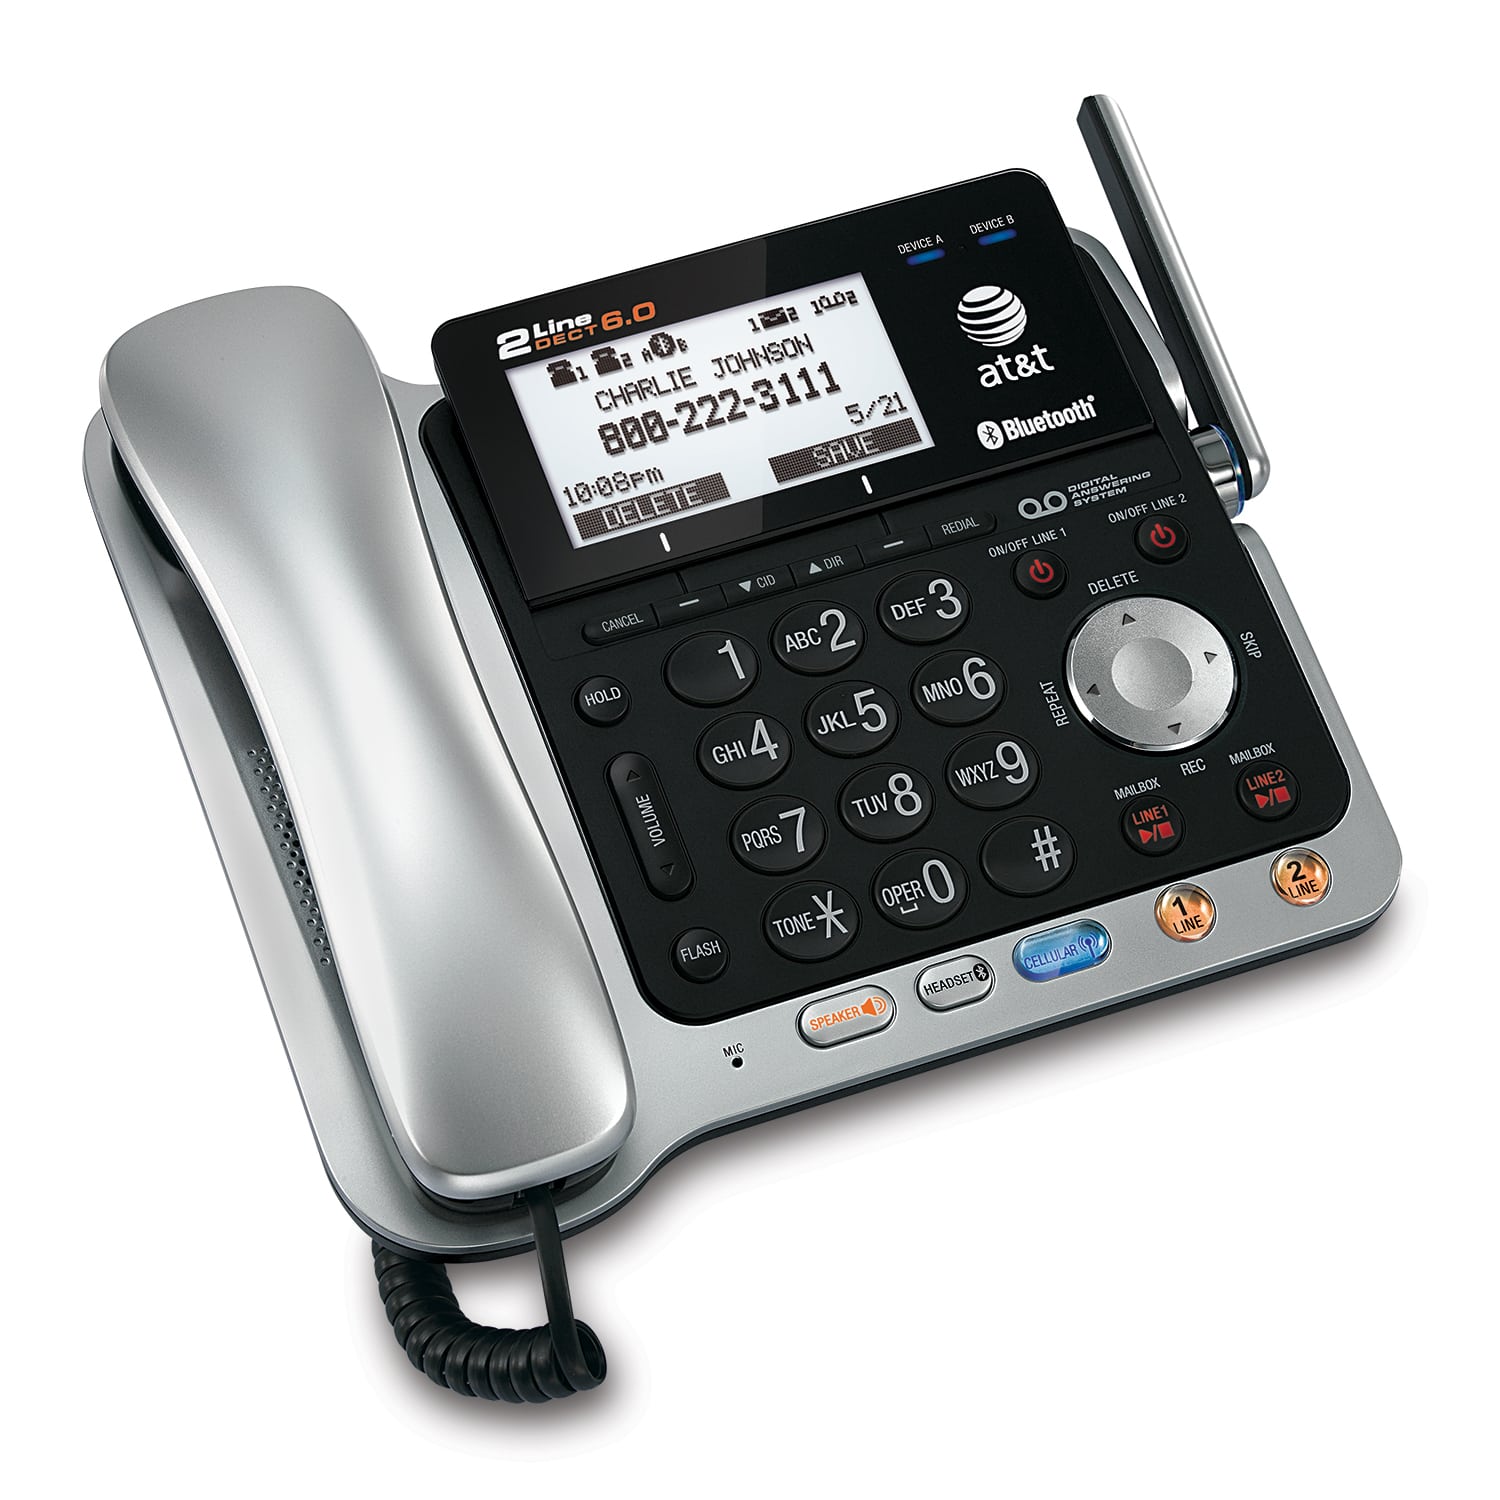 2-line 4 handset Connect to Cell™ corded/cordless answering system with caller ID/call waiting - view 3